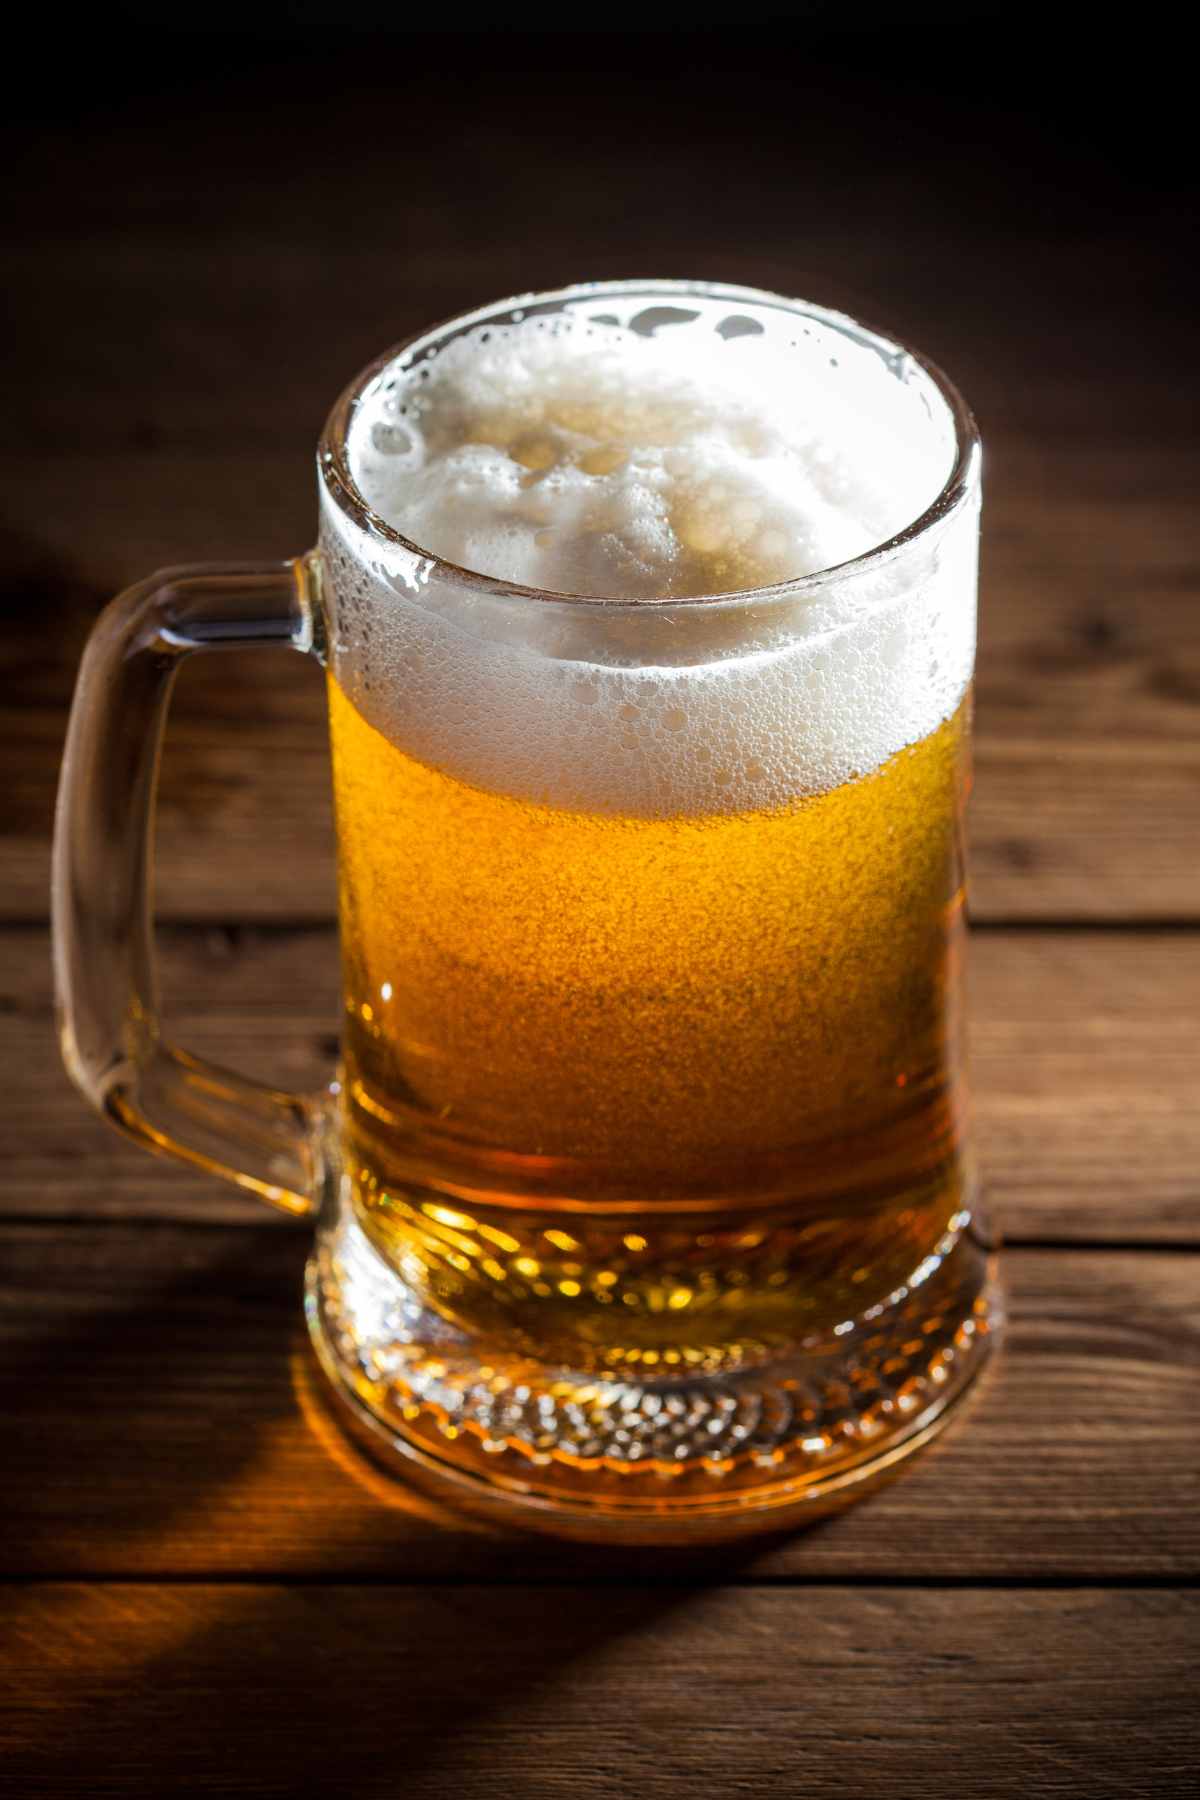 If you're on a keto diet, you may wonder whether the beer is keto and how many carbs are in beer. Beer is a popular alcoholic drink that is enjoyed by many people, but it's known to be high in carbs. However, there are low-carb beer options available that can help you stay on track with your keto diet while still allowing you to enjoy a cold brew.